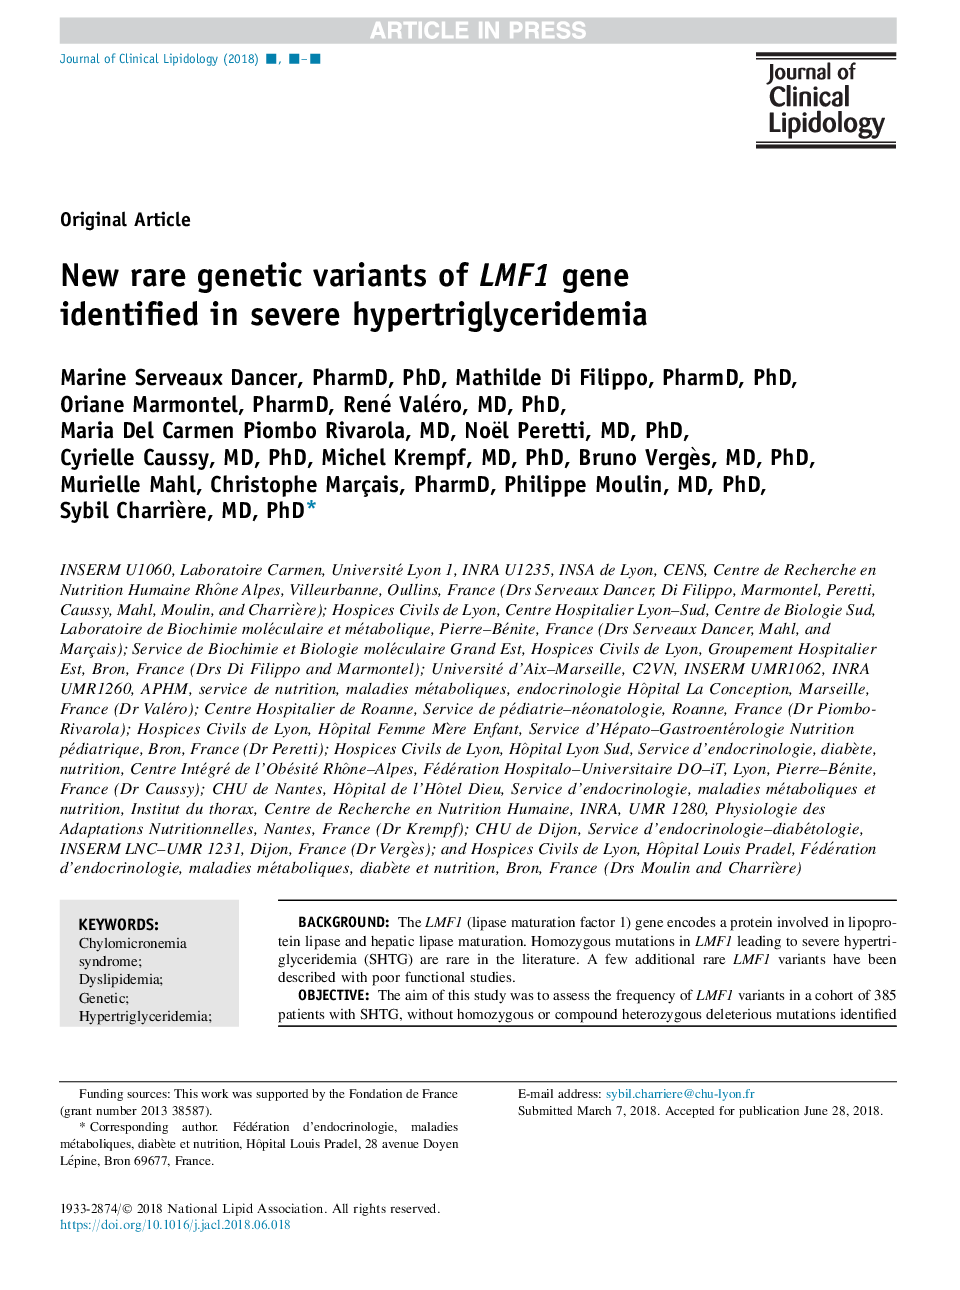 New rare genetic variants of LMF1 gene identified in severe hypertriglyceridemia